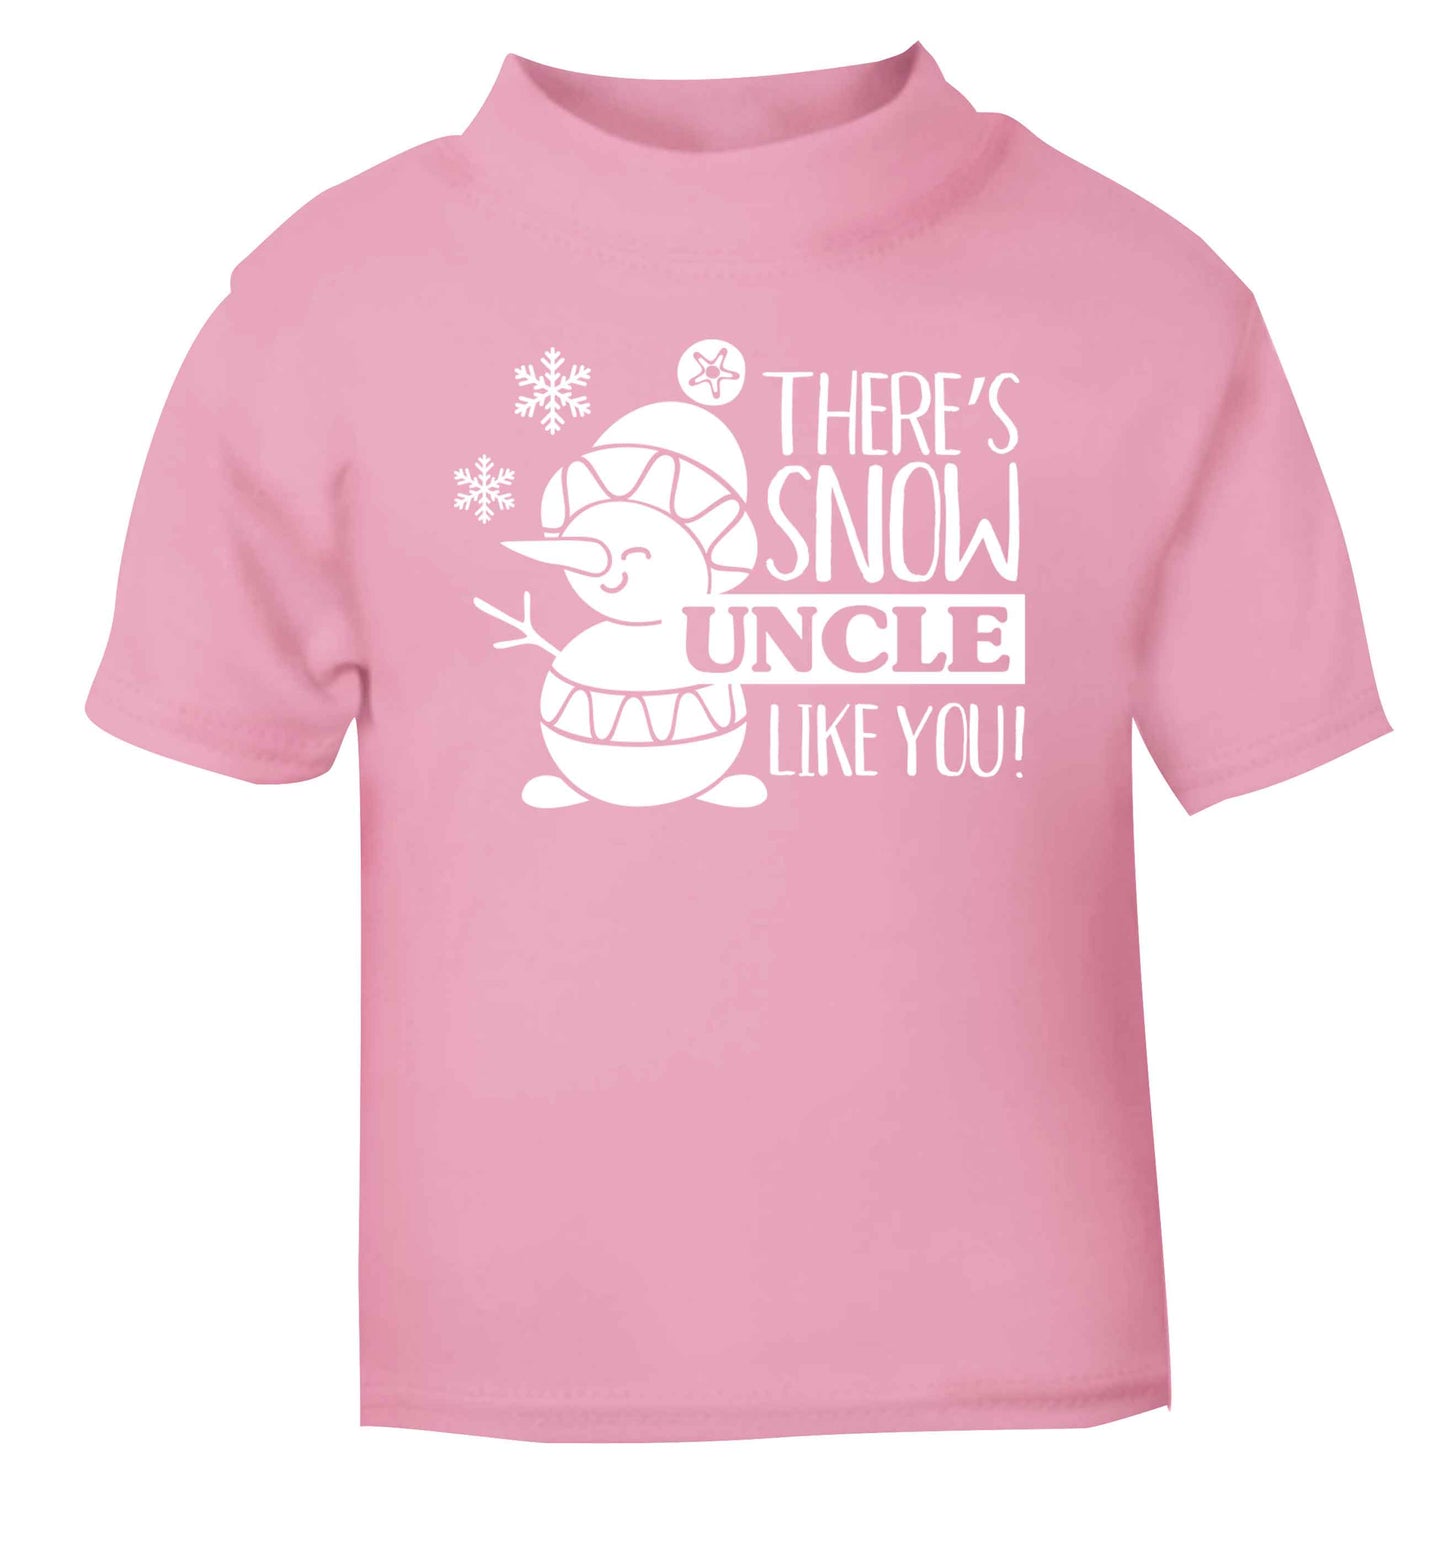 There's snow uncle like you light pink baby toddler Tshirt 2 Years